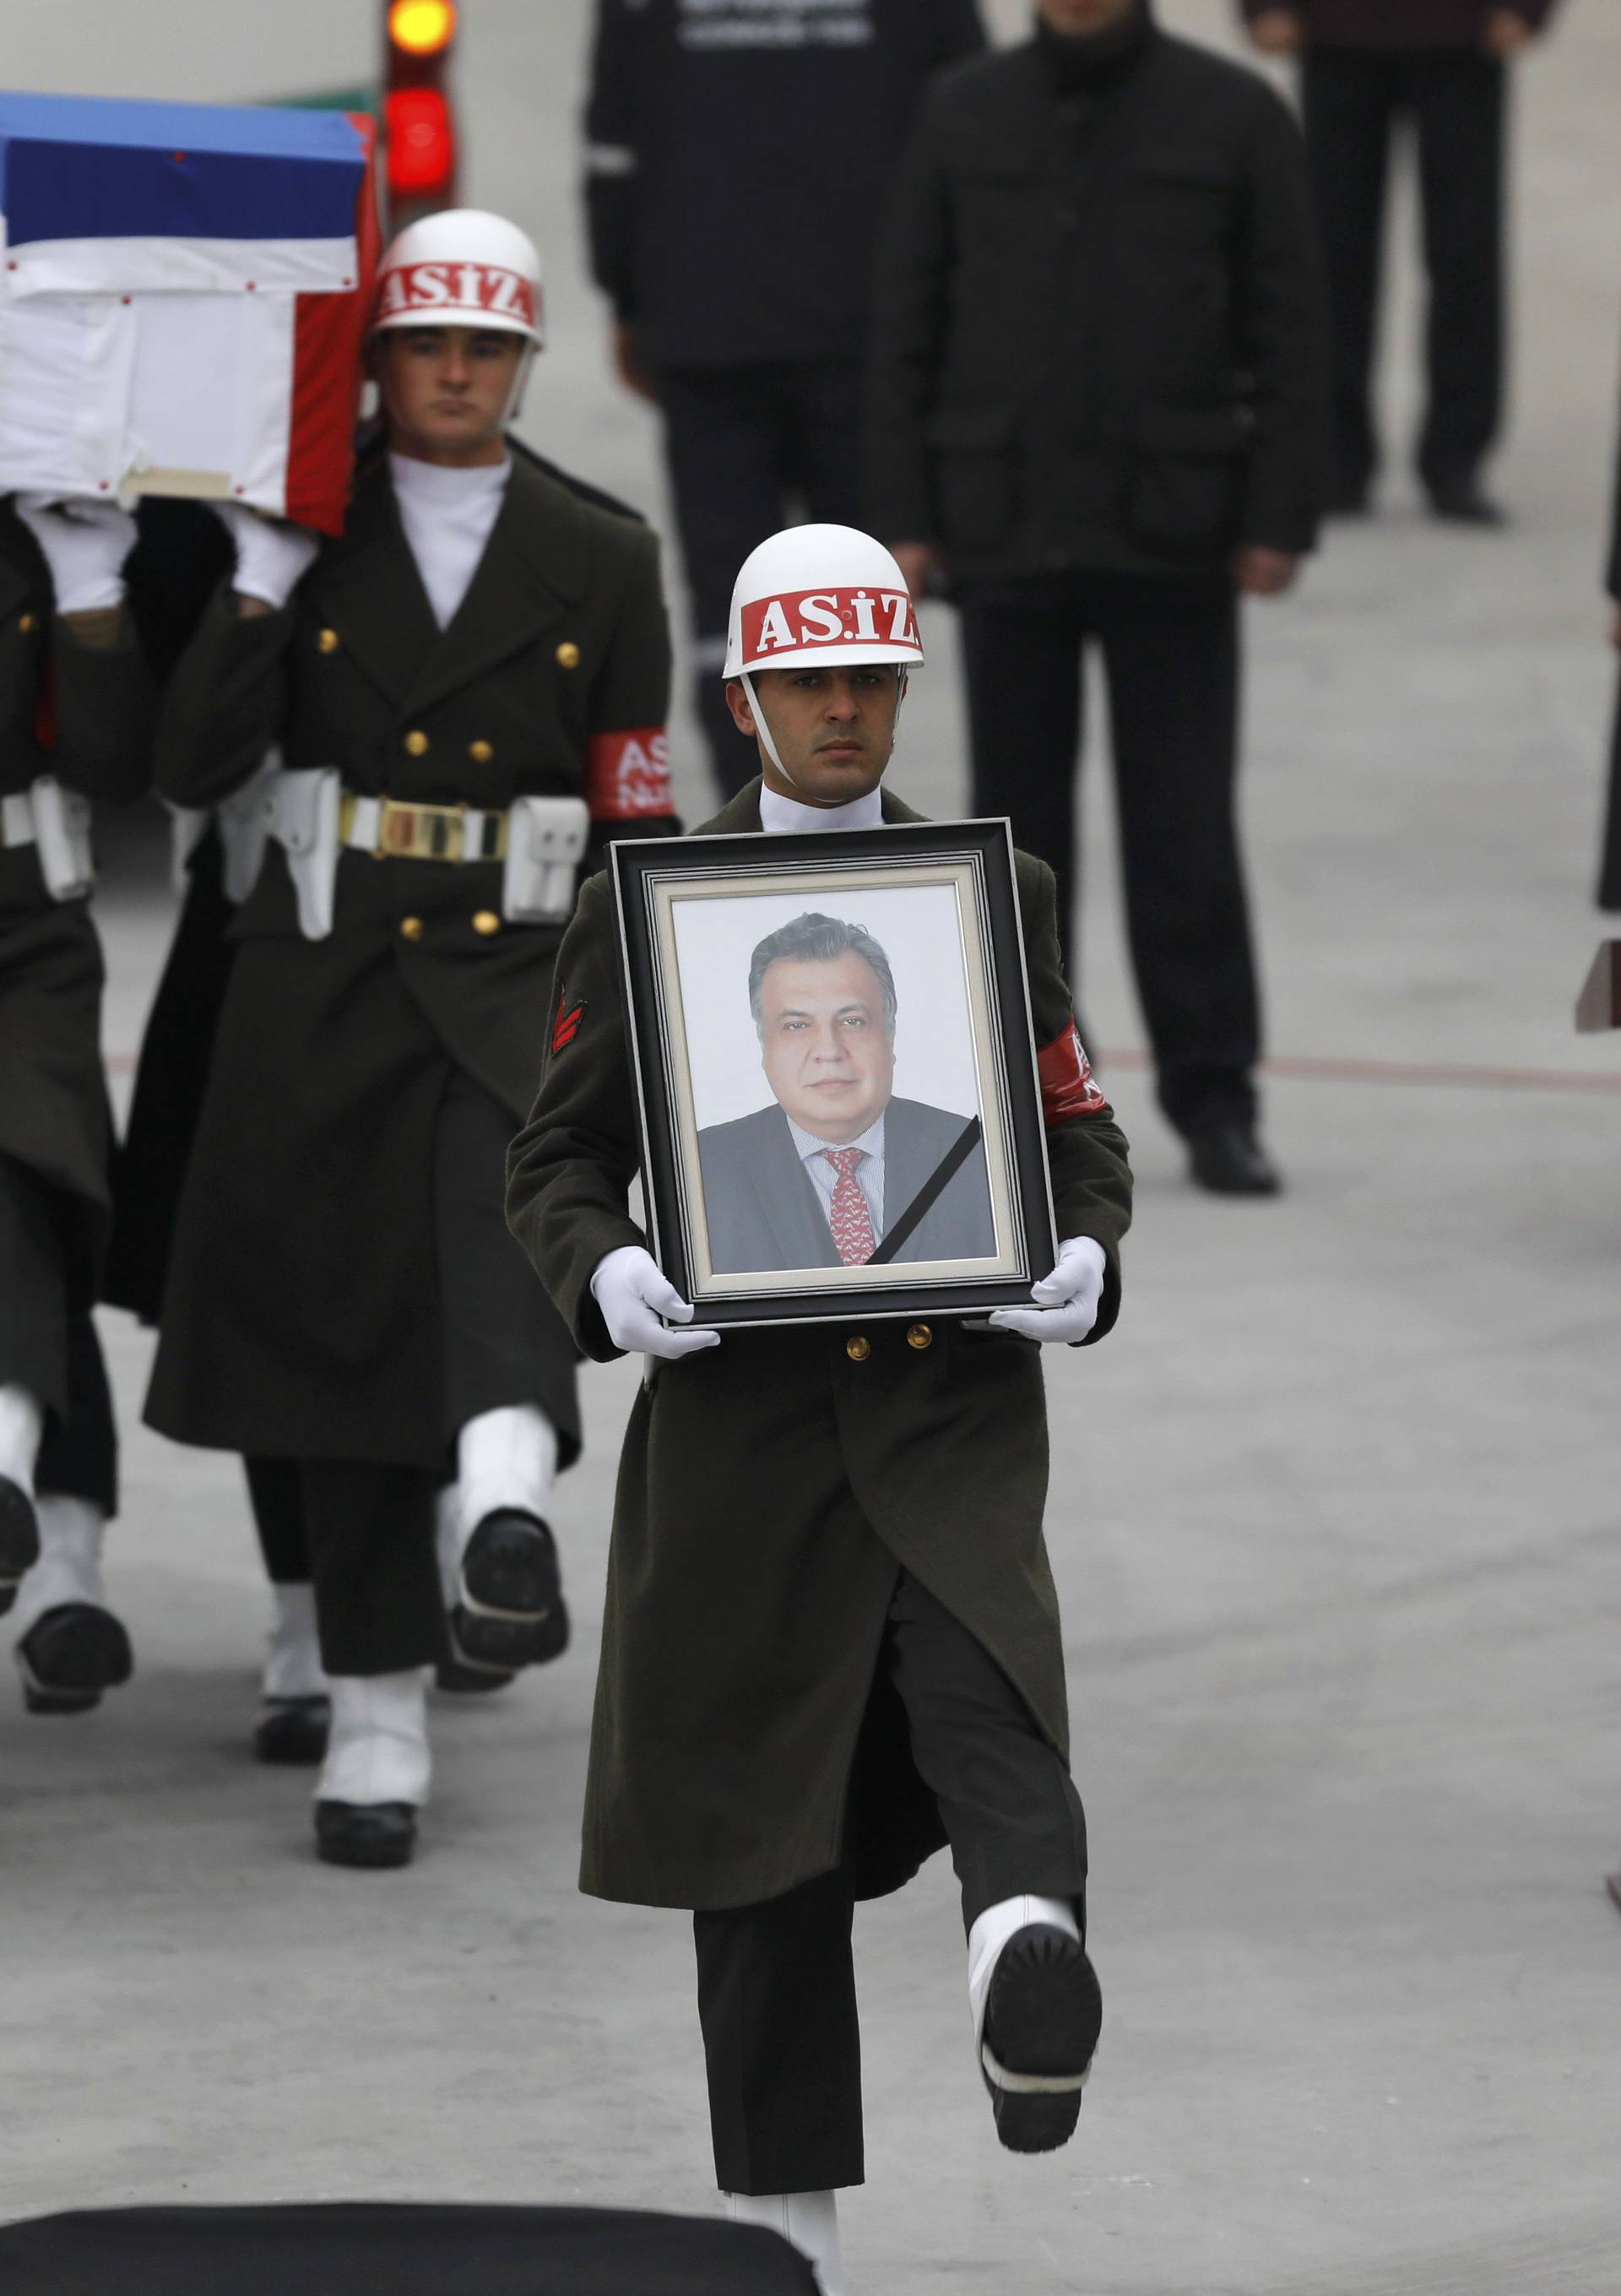 Flag-wrapped coffin of late Russian Ambassador to Turkey Karlov is carried to a plane during a ceremony at Esenboga airport in Ankara